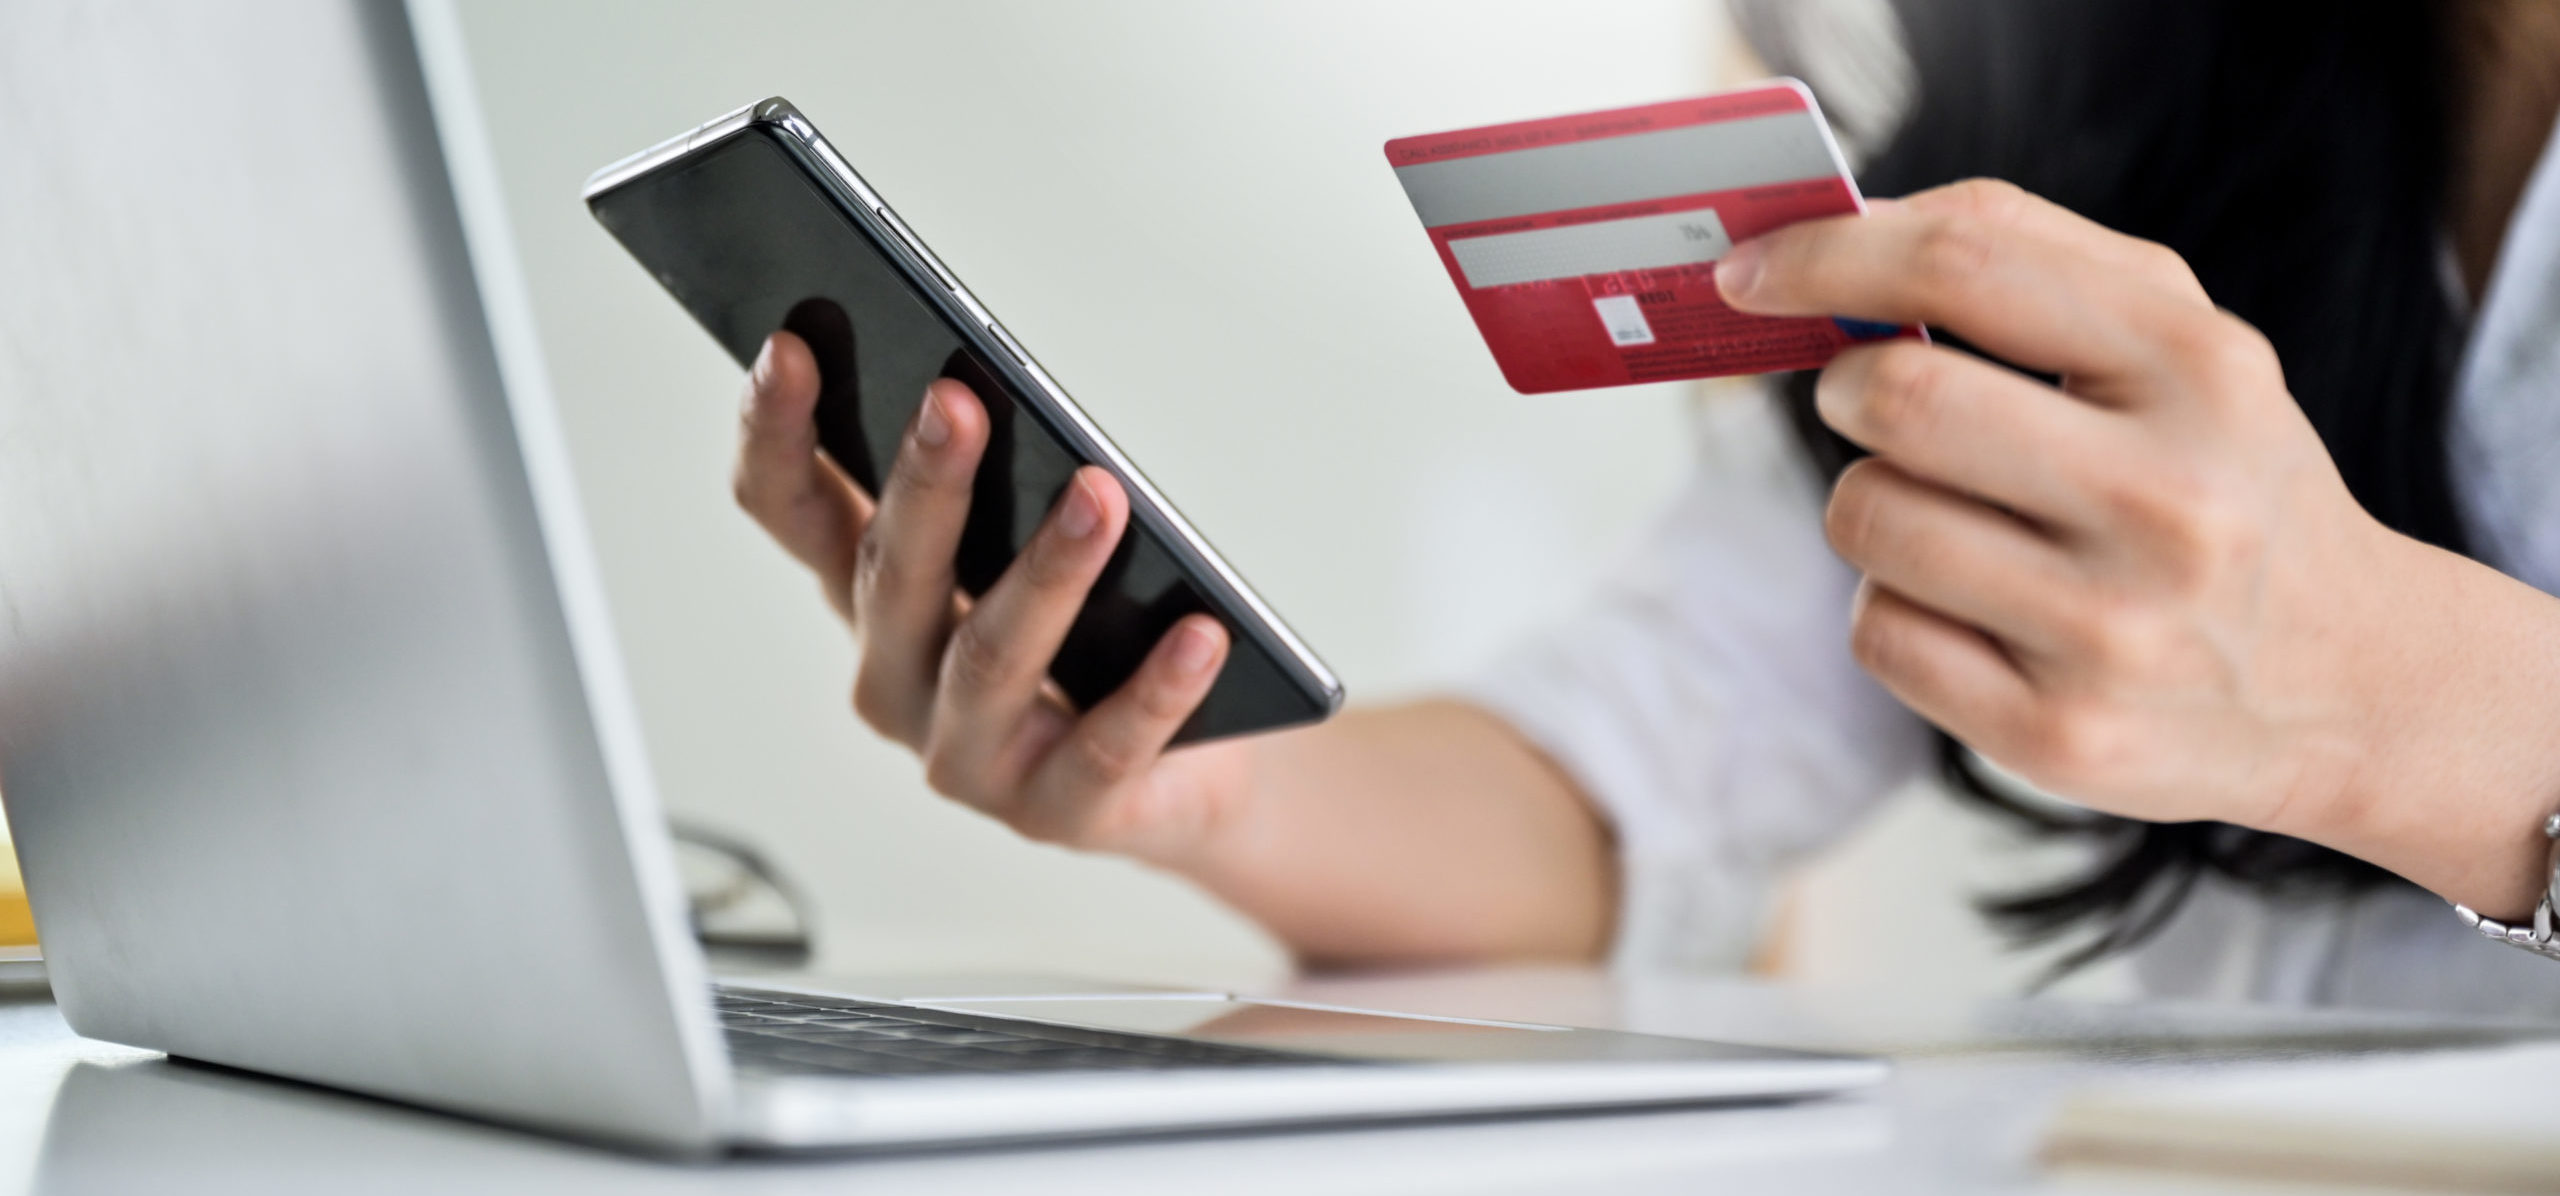 Young woman holding credit card and smartphone with laptop, Online shopping concept, Credit card payment.